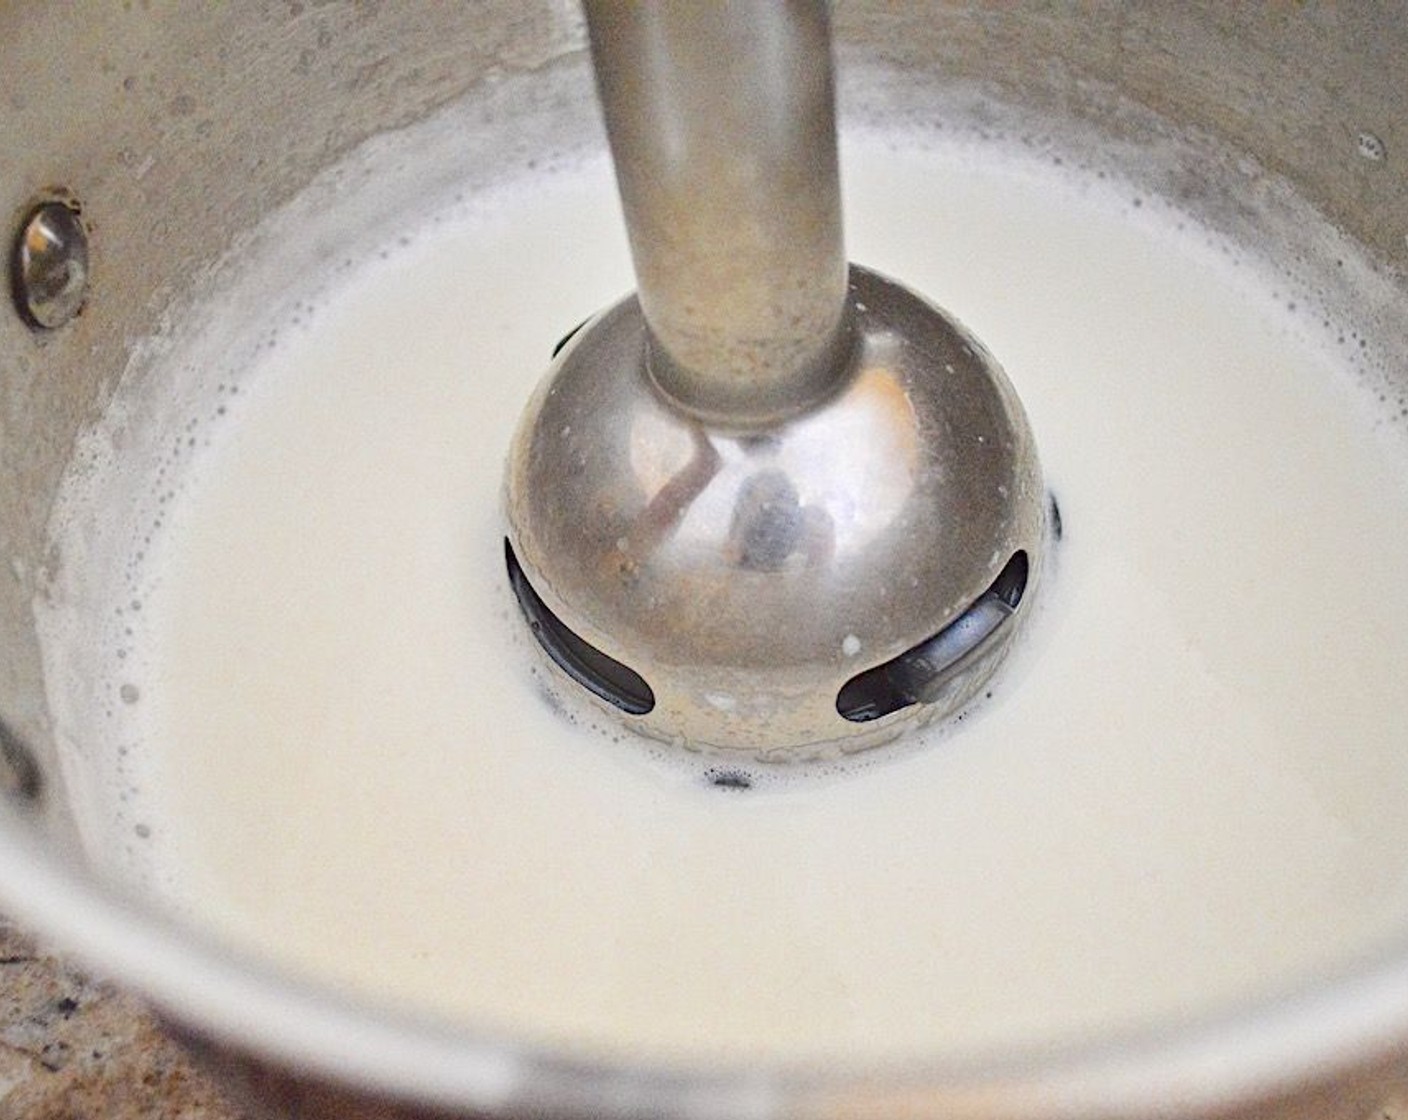 step 5 Once the milk starts to bubble, take it off the heat and use an immersion blender to get it nice and frothy.